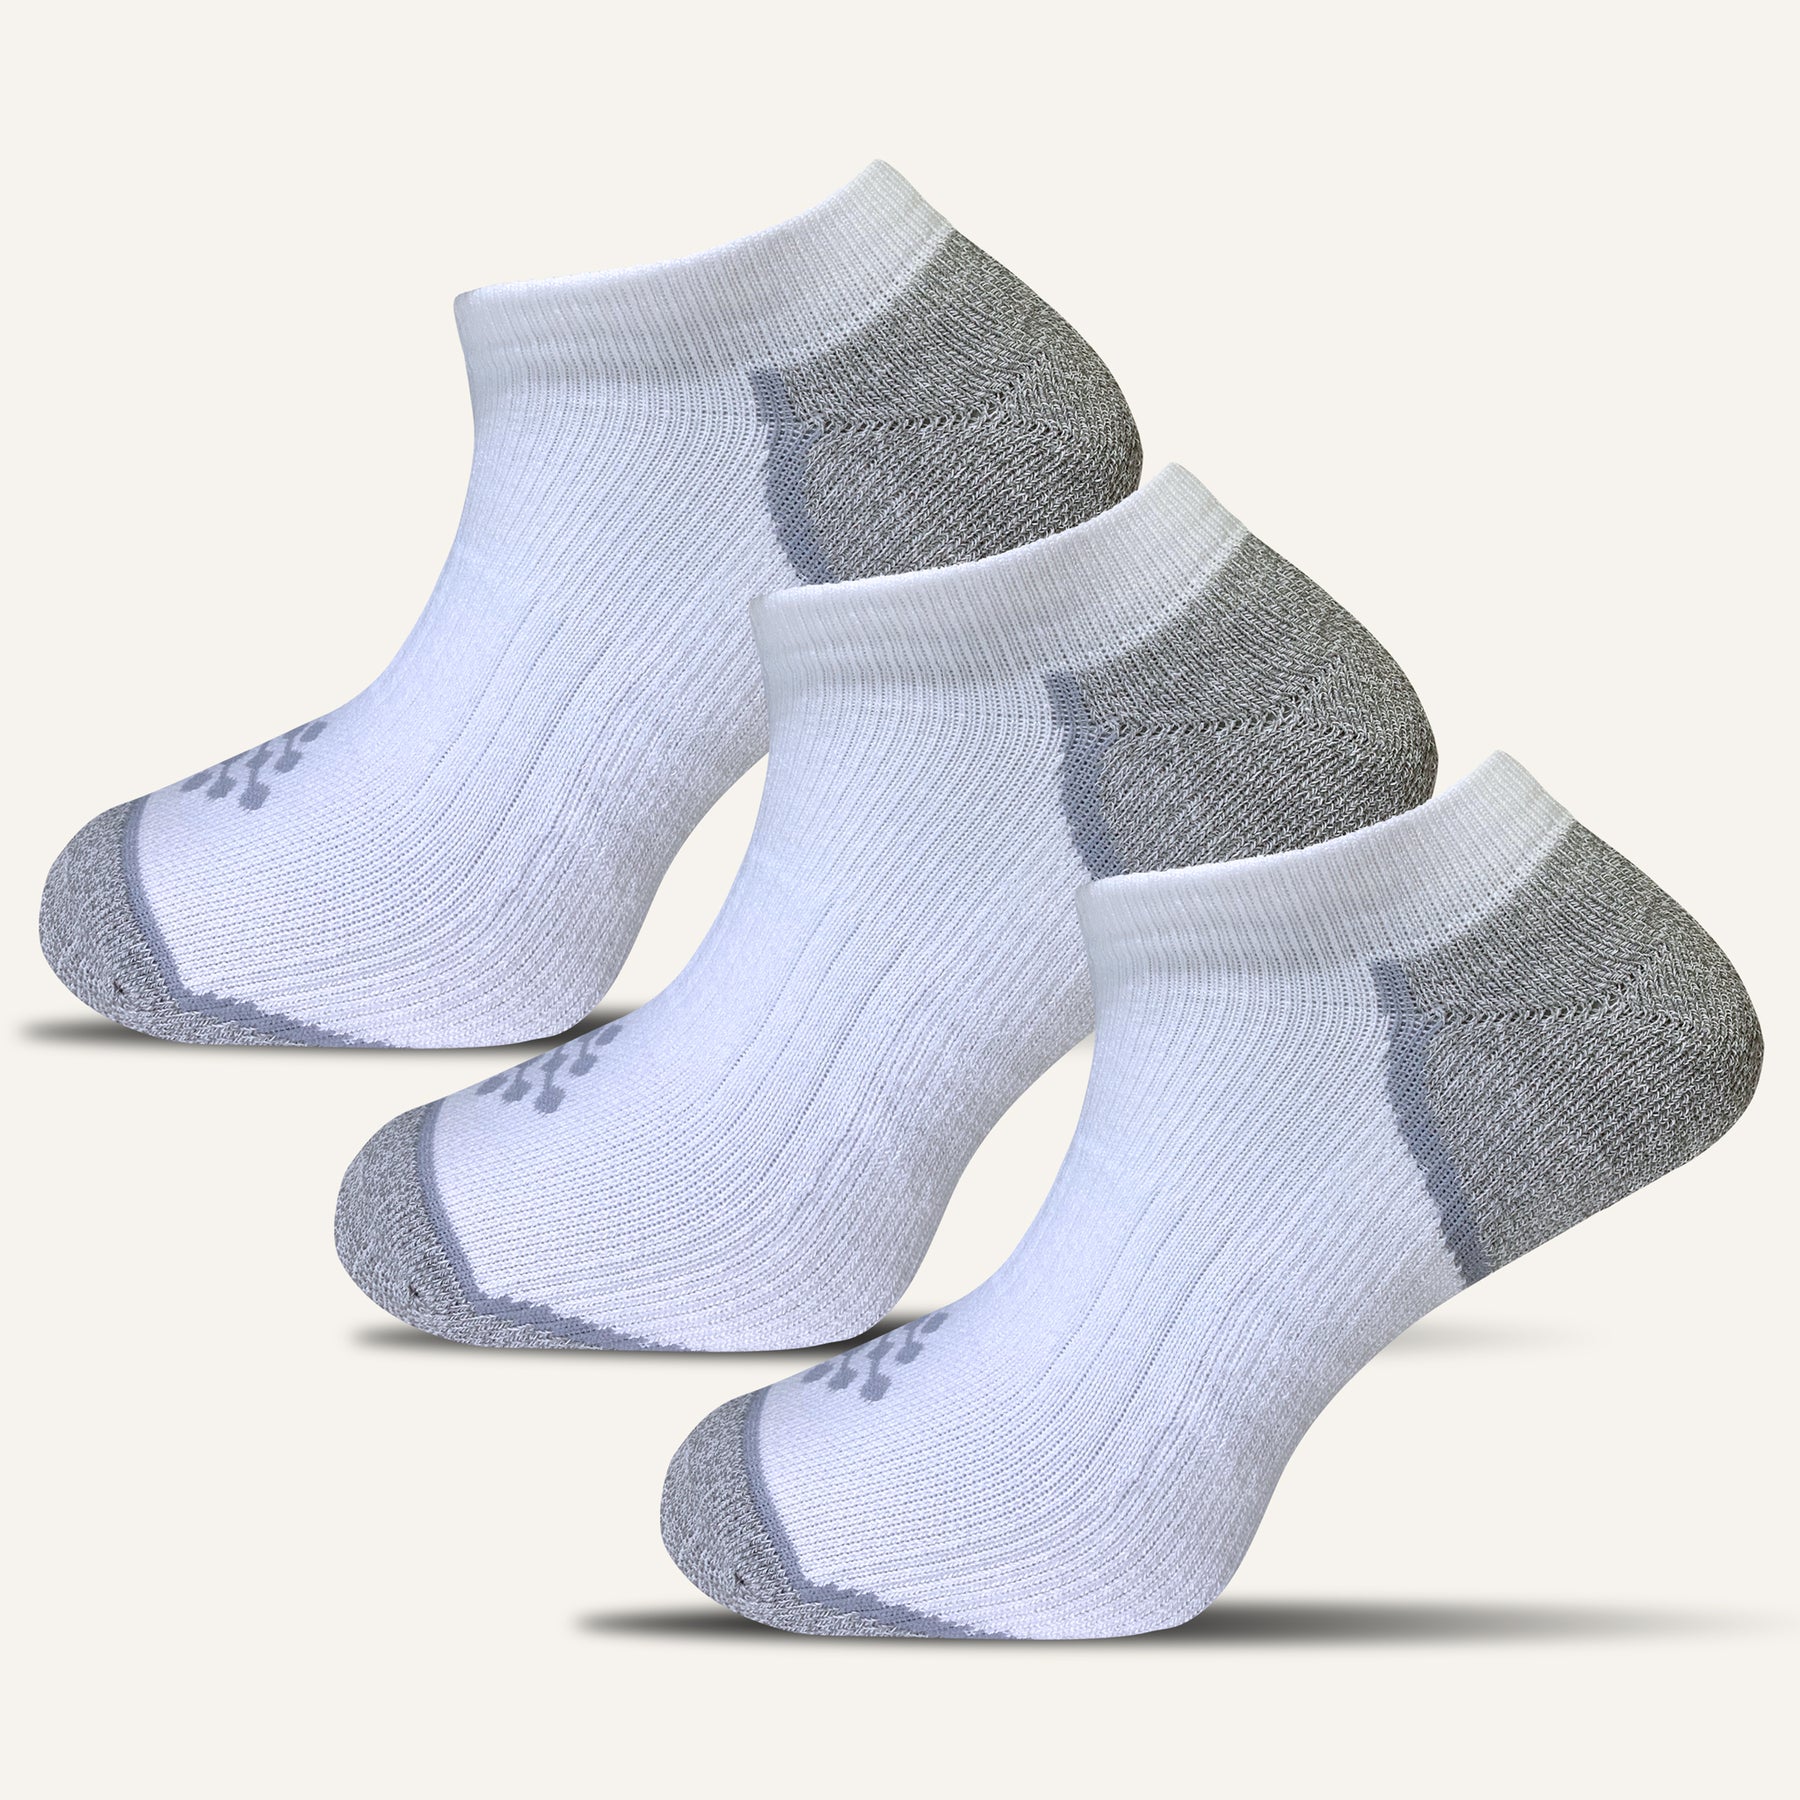 Essentials Men's Performance Cotton Cushioned Athletic No-Show  Socks, 6 Pairs